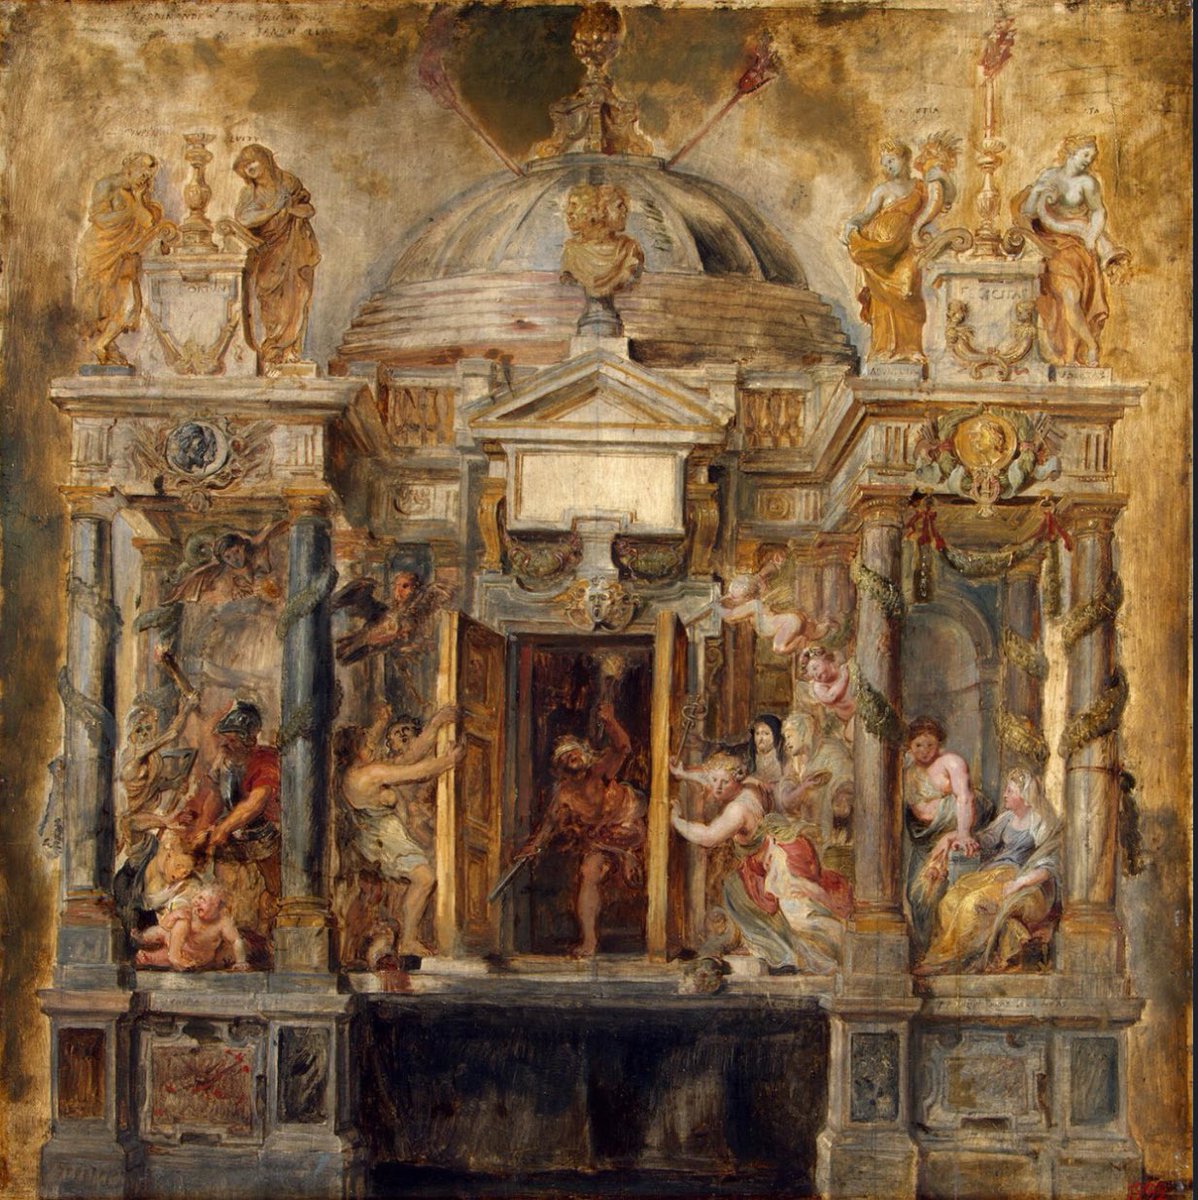 In the theme of this deity, the Hermitage Museum hosts Rubens' masterpiece: 'The Temple of Janus,' featuring its bifrontal depiction at the top.